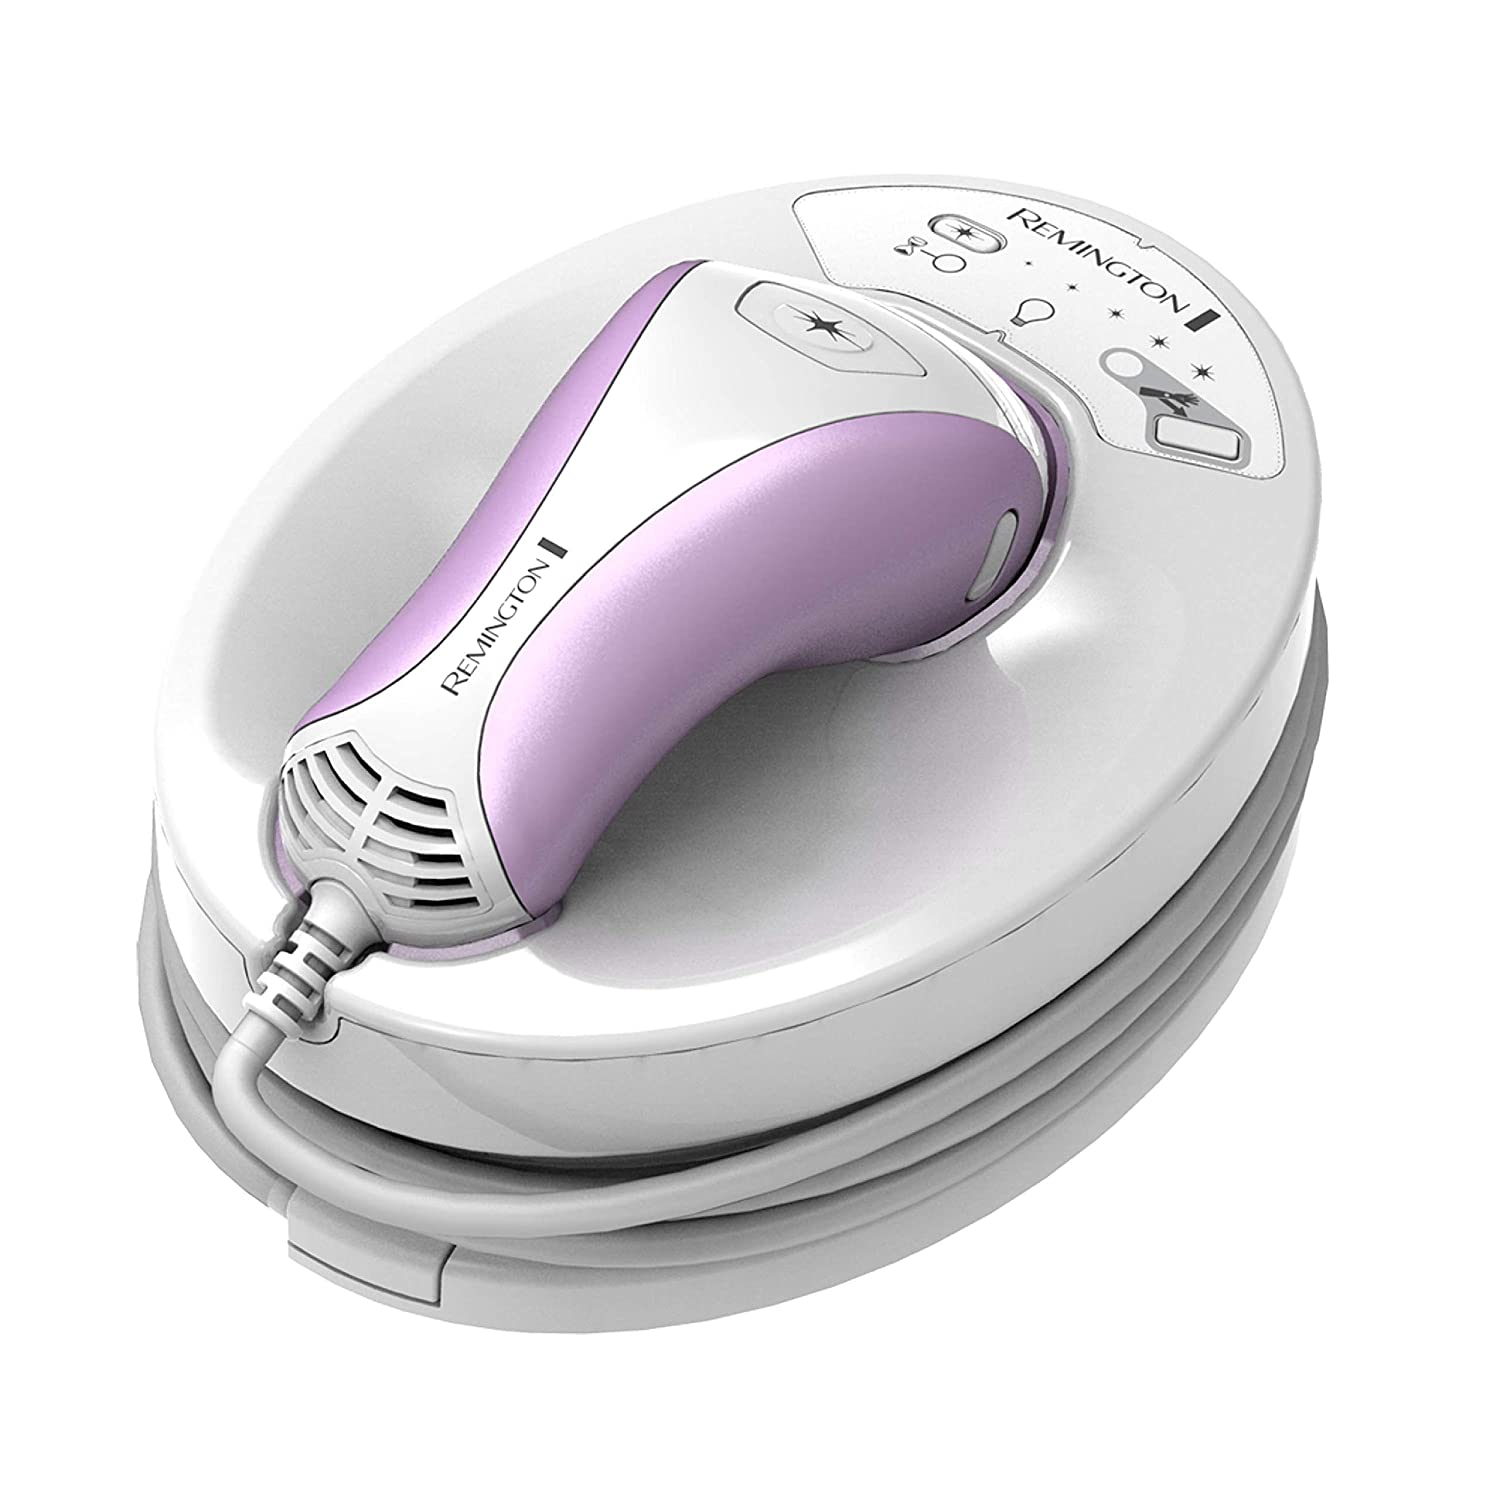 10 Best Laser Hair Removal Machines [ 2021 ] Live Beauty Health